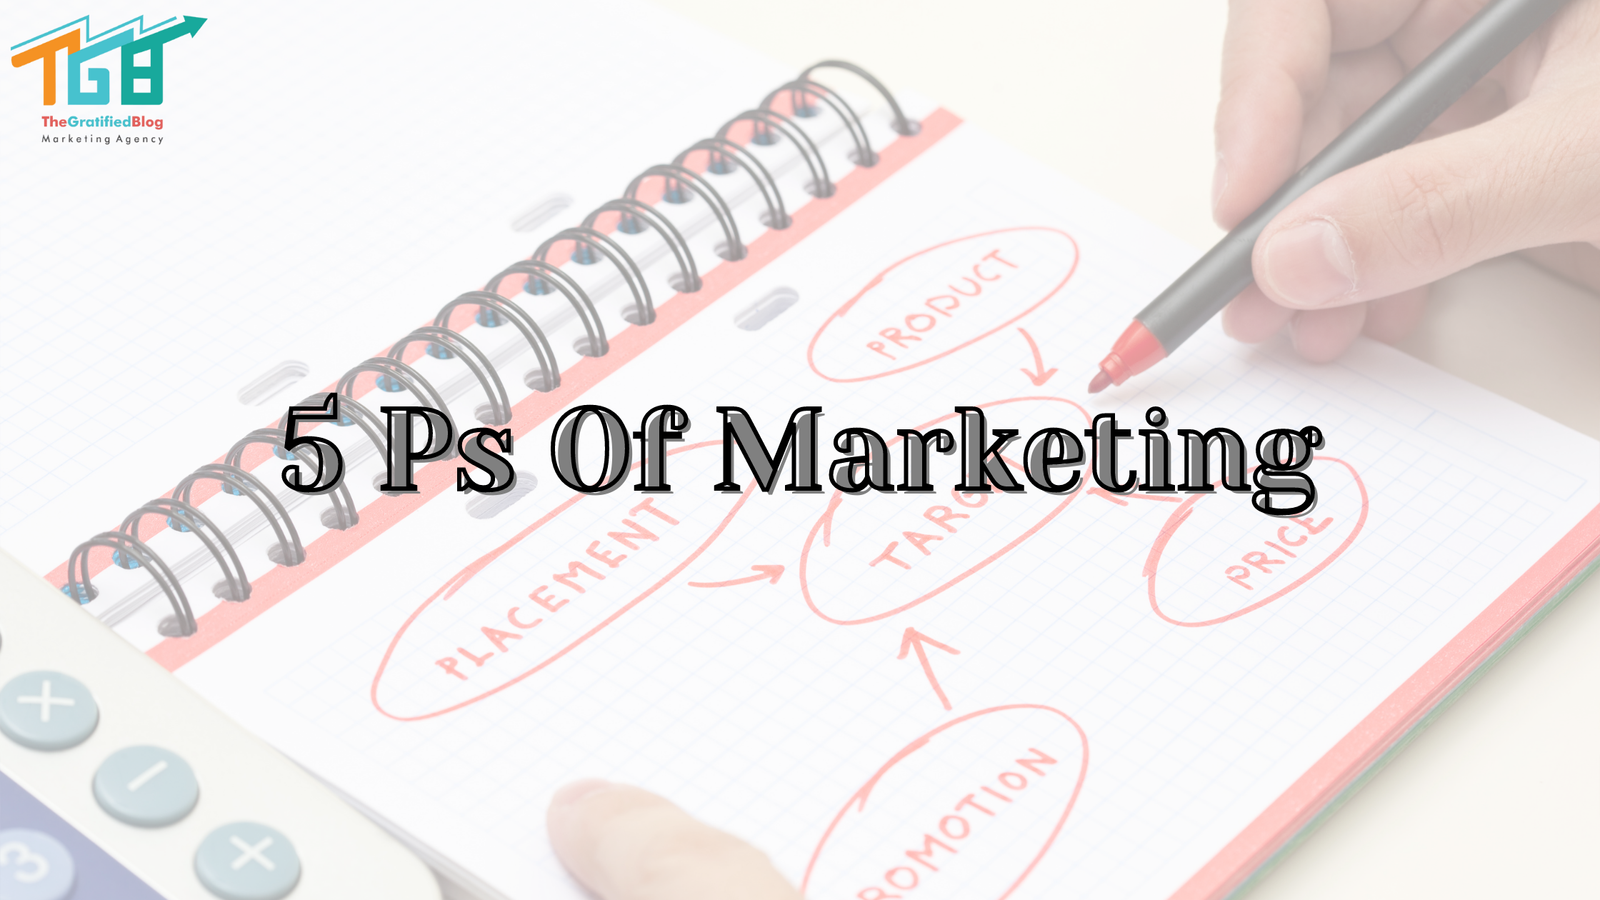 5 Ps Of Marketing: How To Fix Your Marketing Funnel?